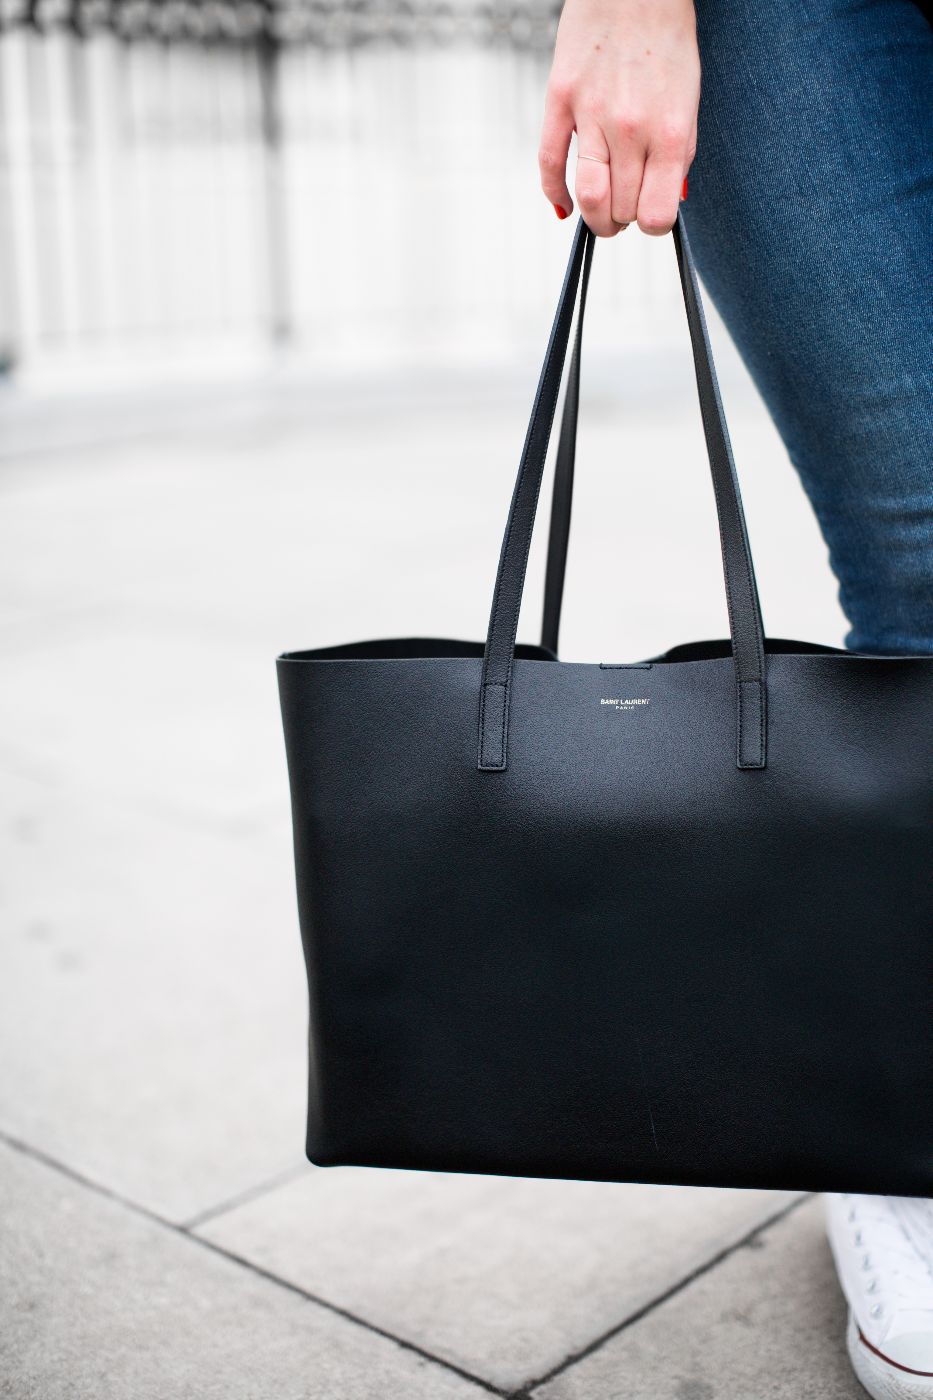 Saint Laurent Shopping E/w Leather Tote Bag in Brown